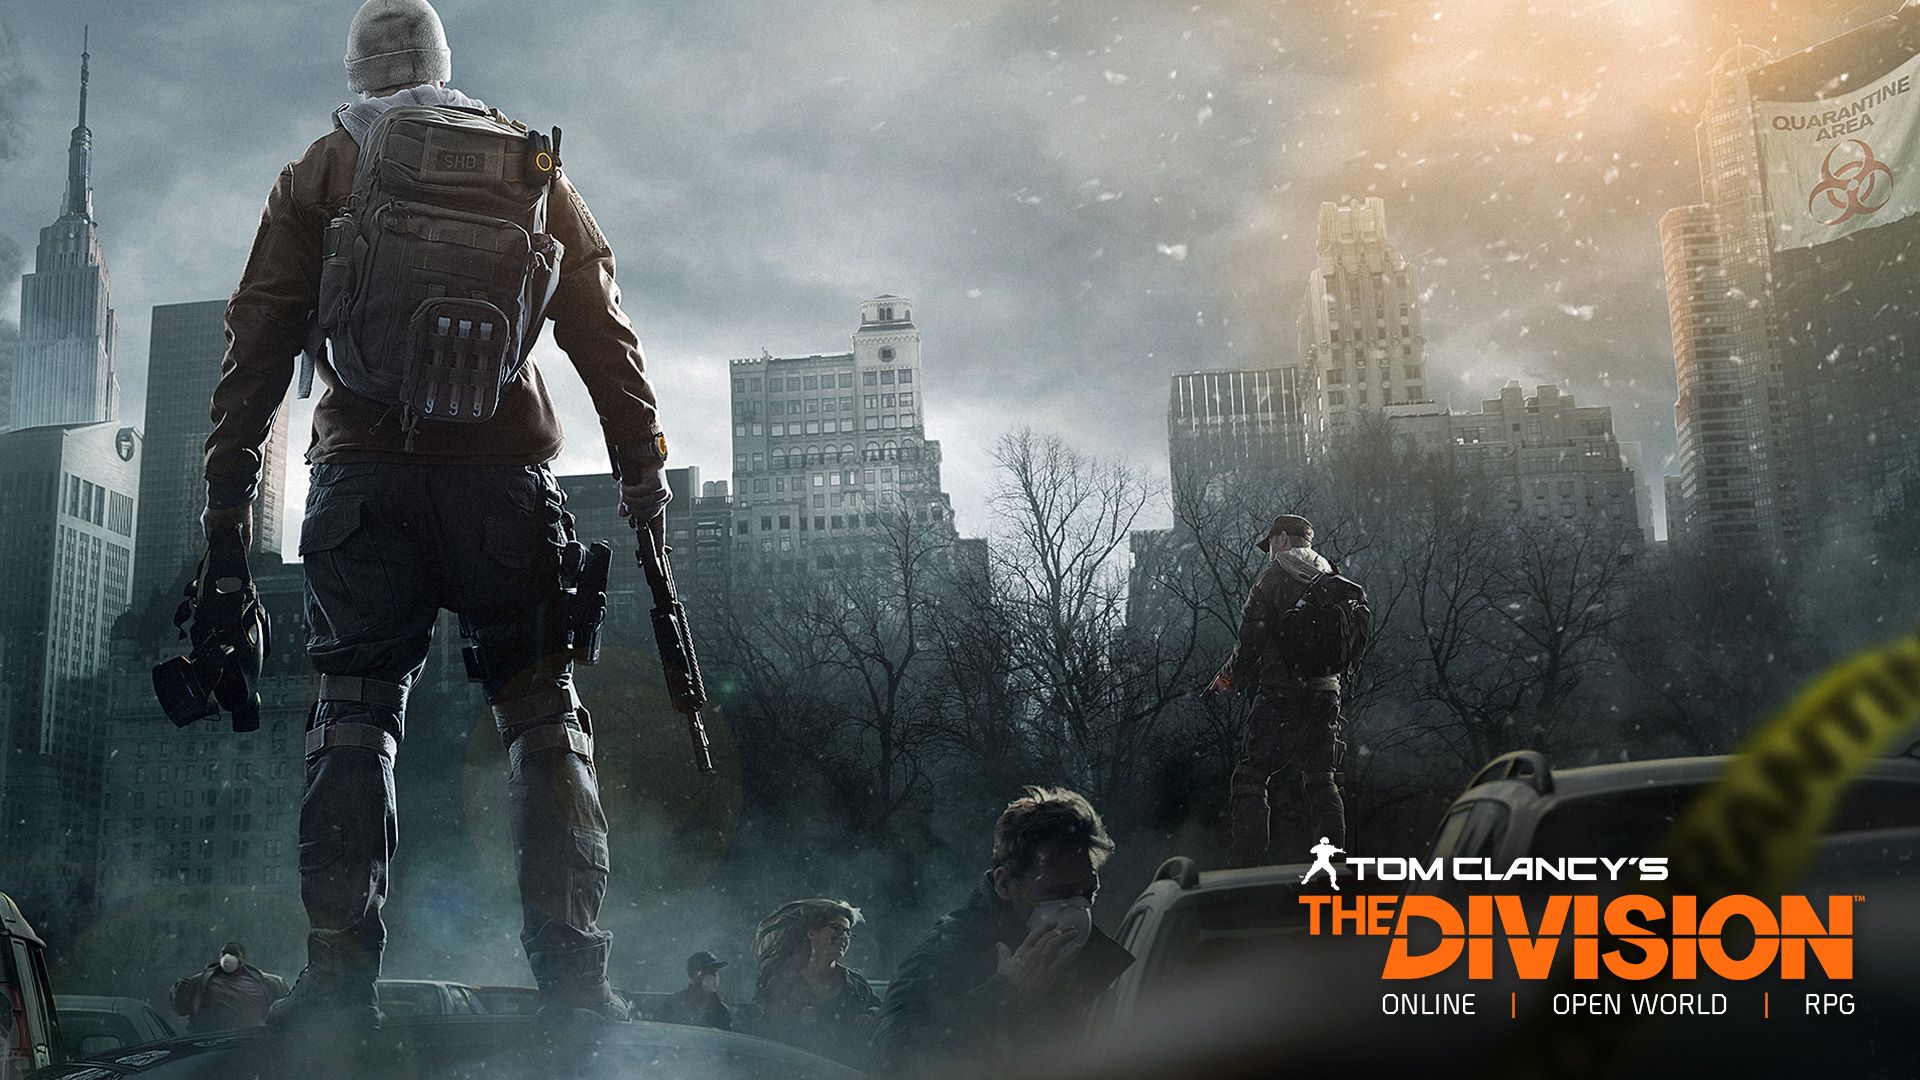 Ubisoft's Next Gen The Division Confirmed For PC Grade Open World RPG Experience